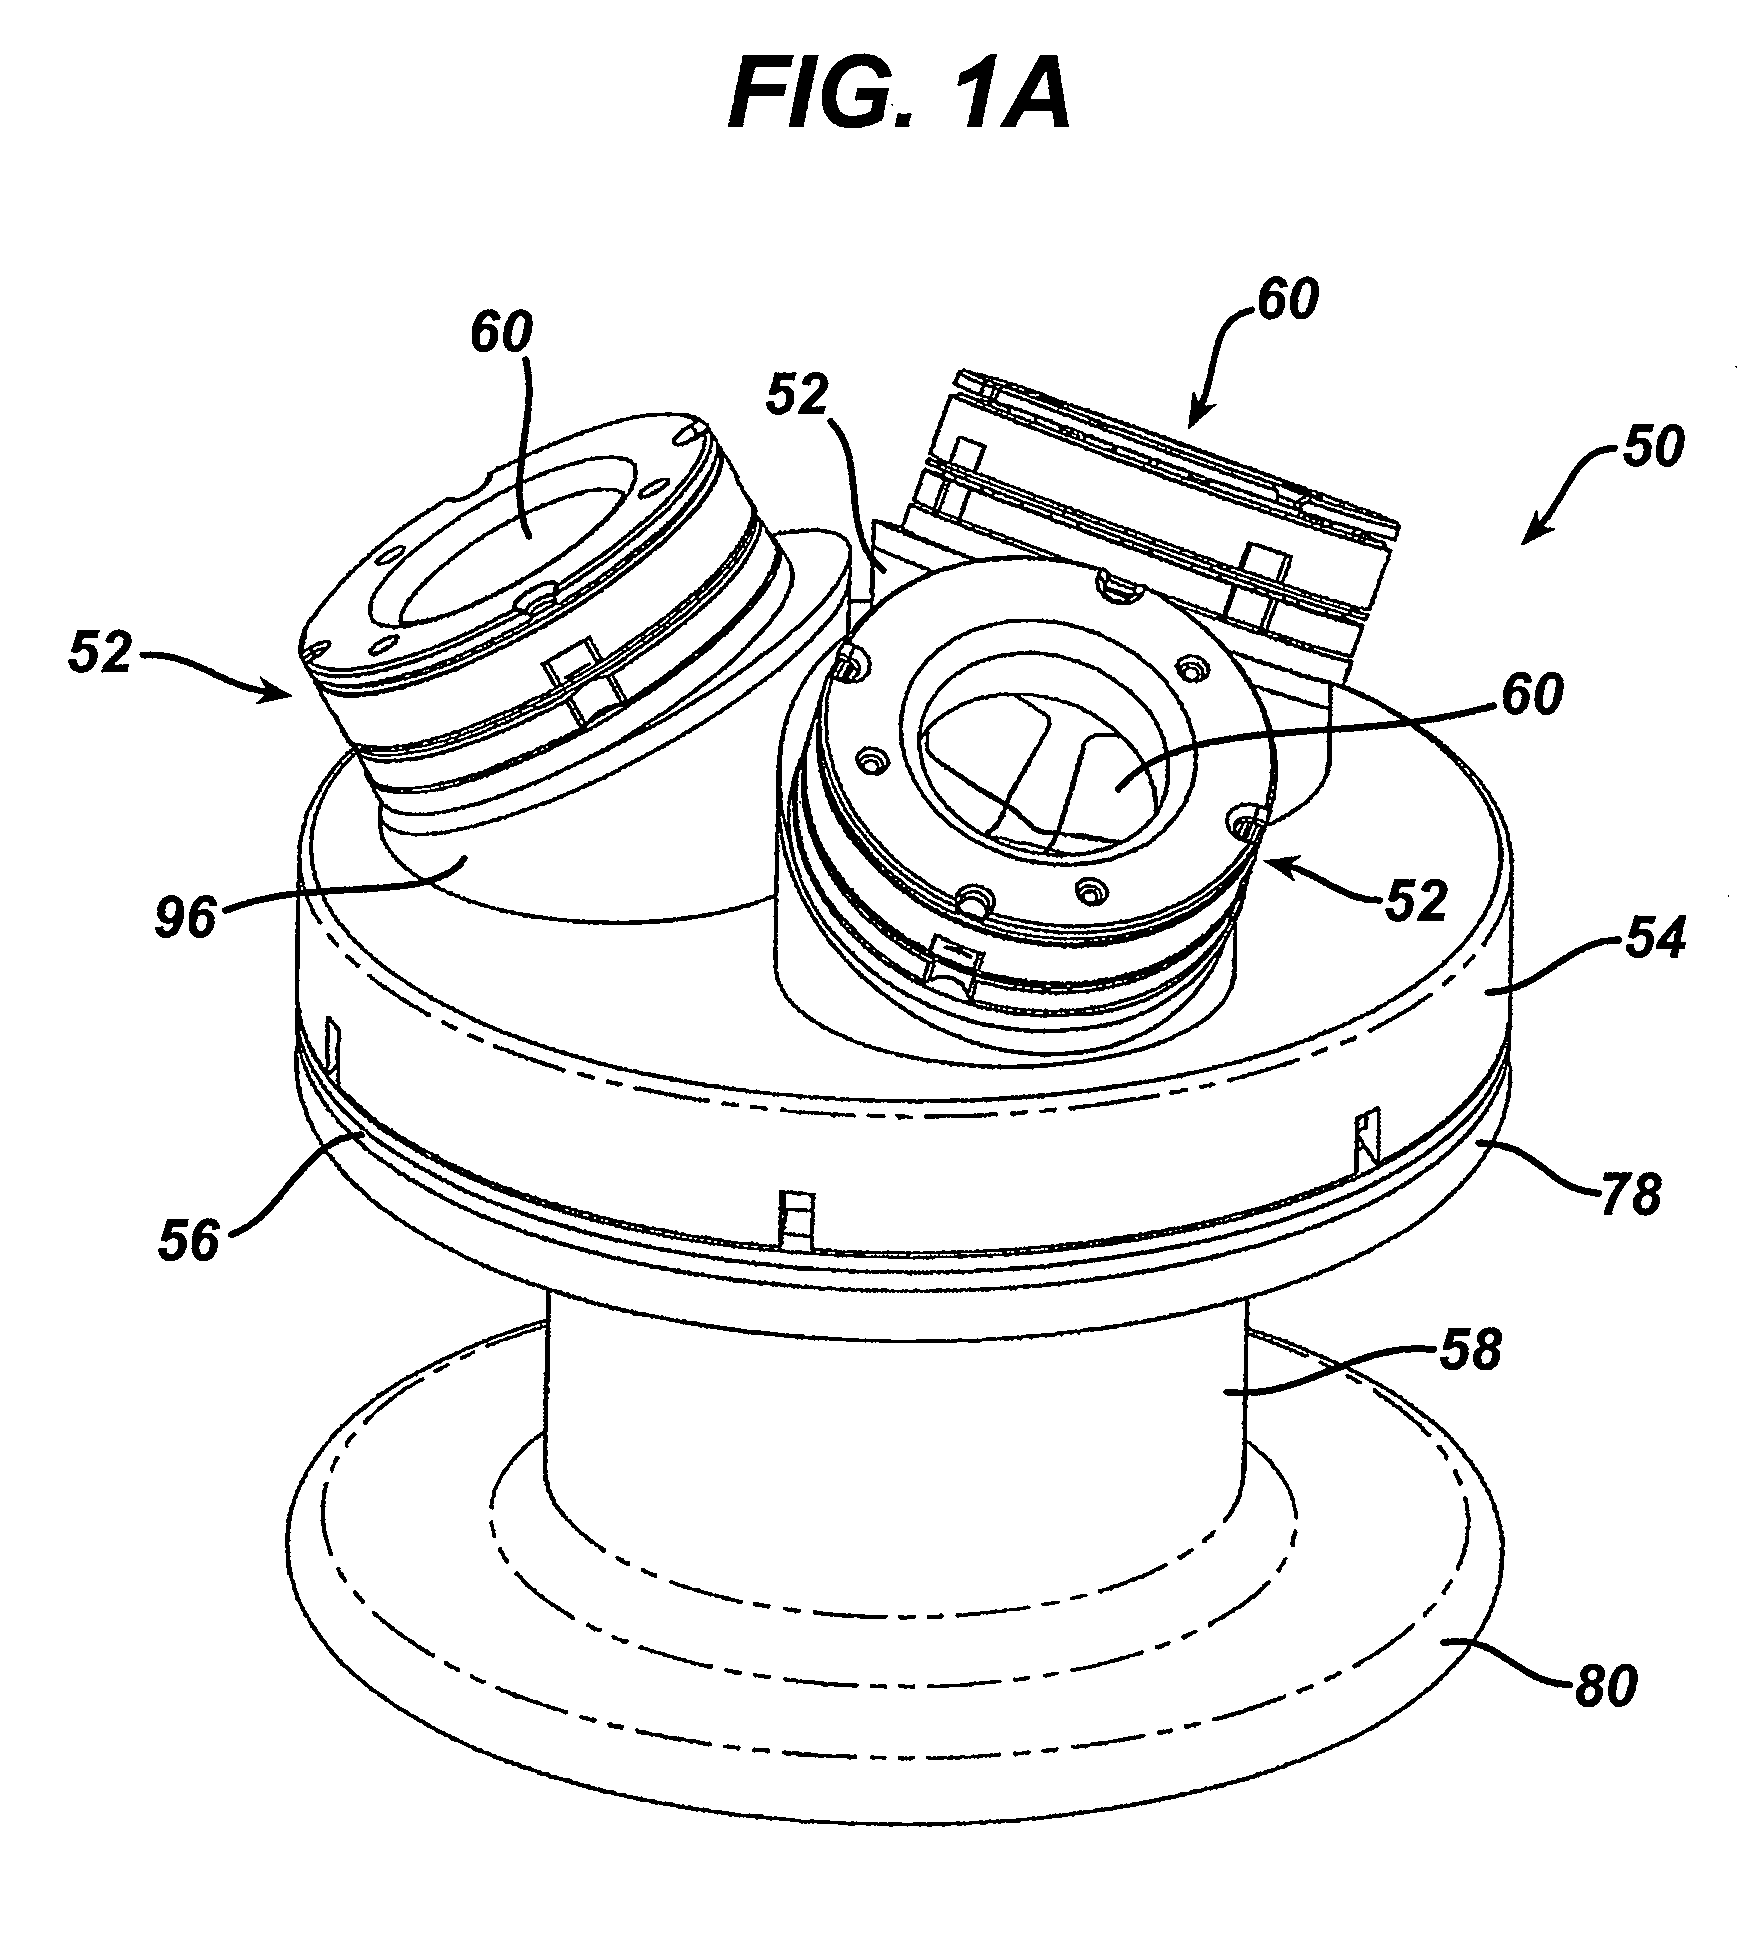 Multiple Port Surgical Access Device